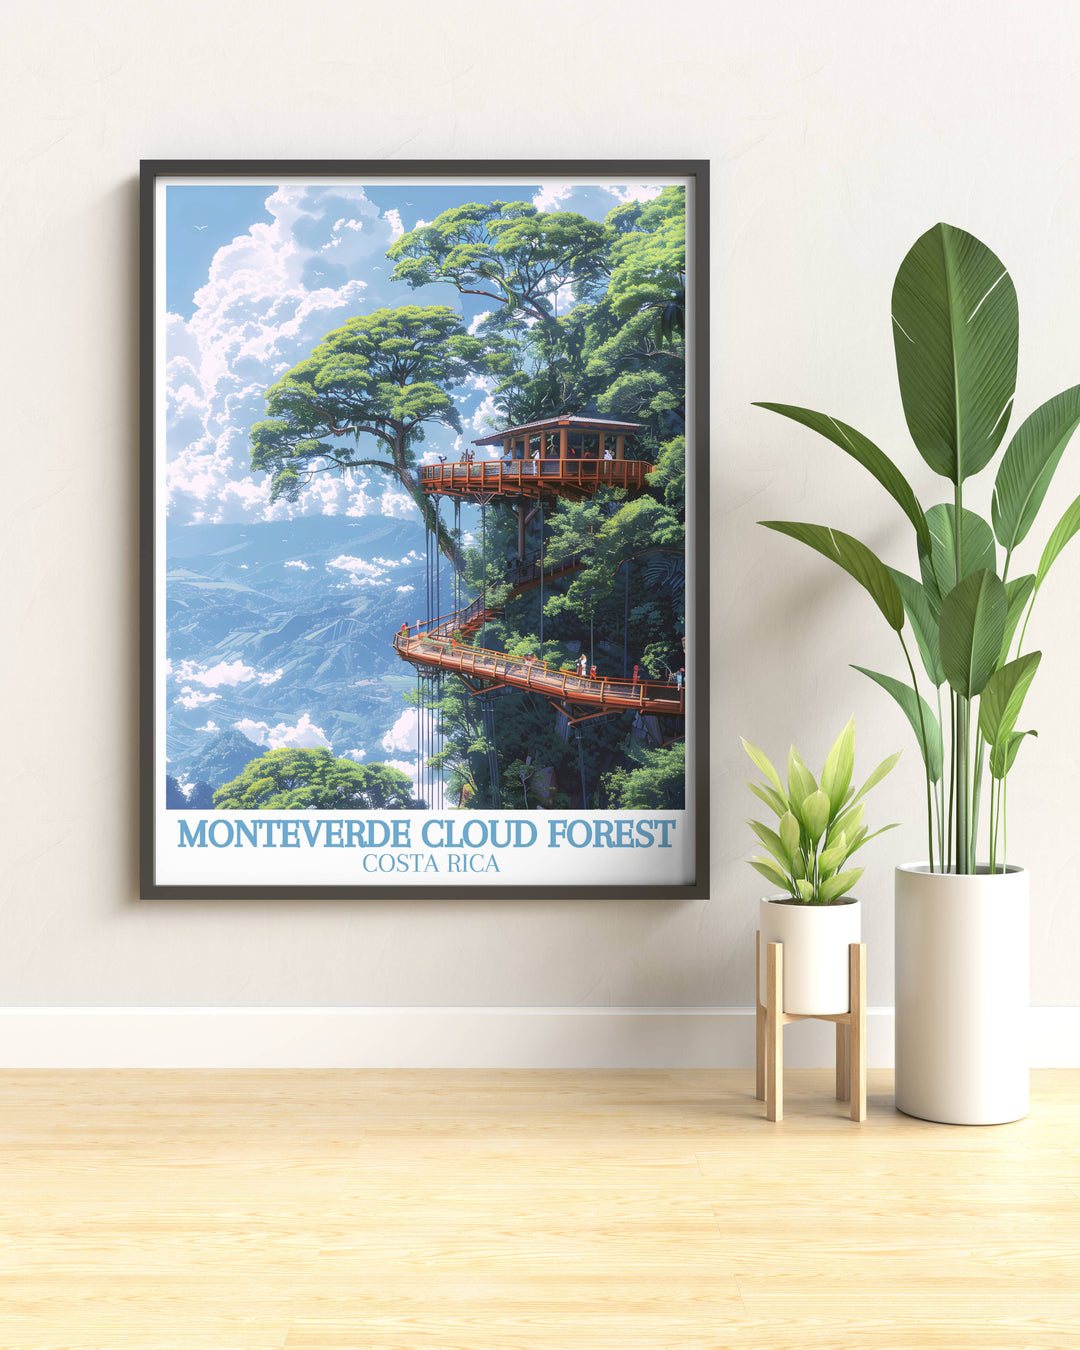 Costa Rica vintage poster capturing the lush landscapes and vibrant biodiversity of Monteverde Cloud Forest.